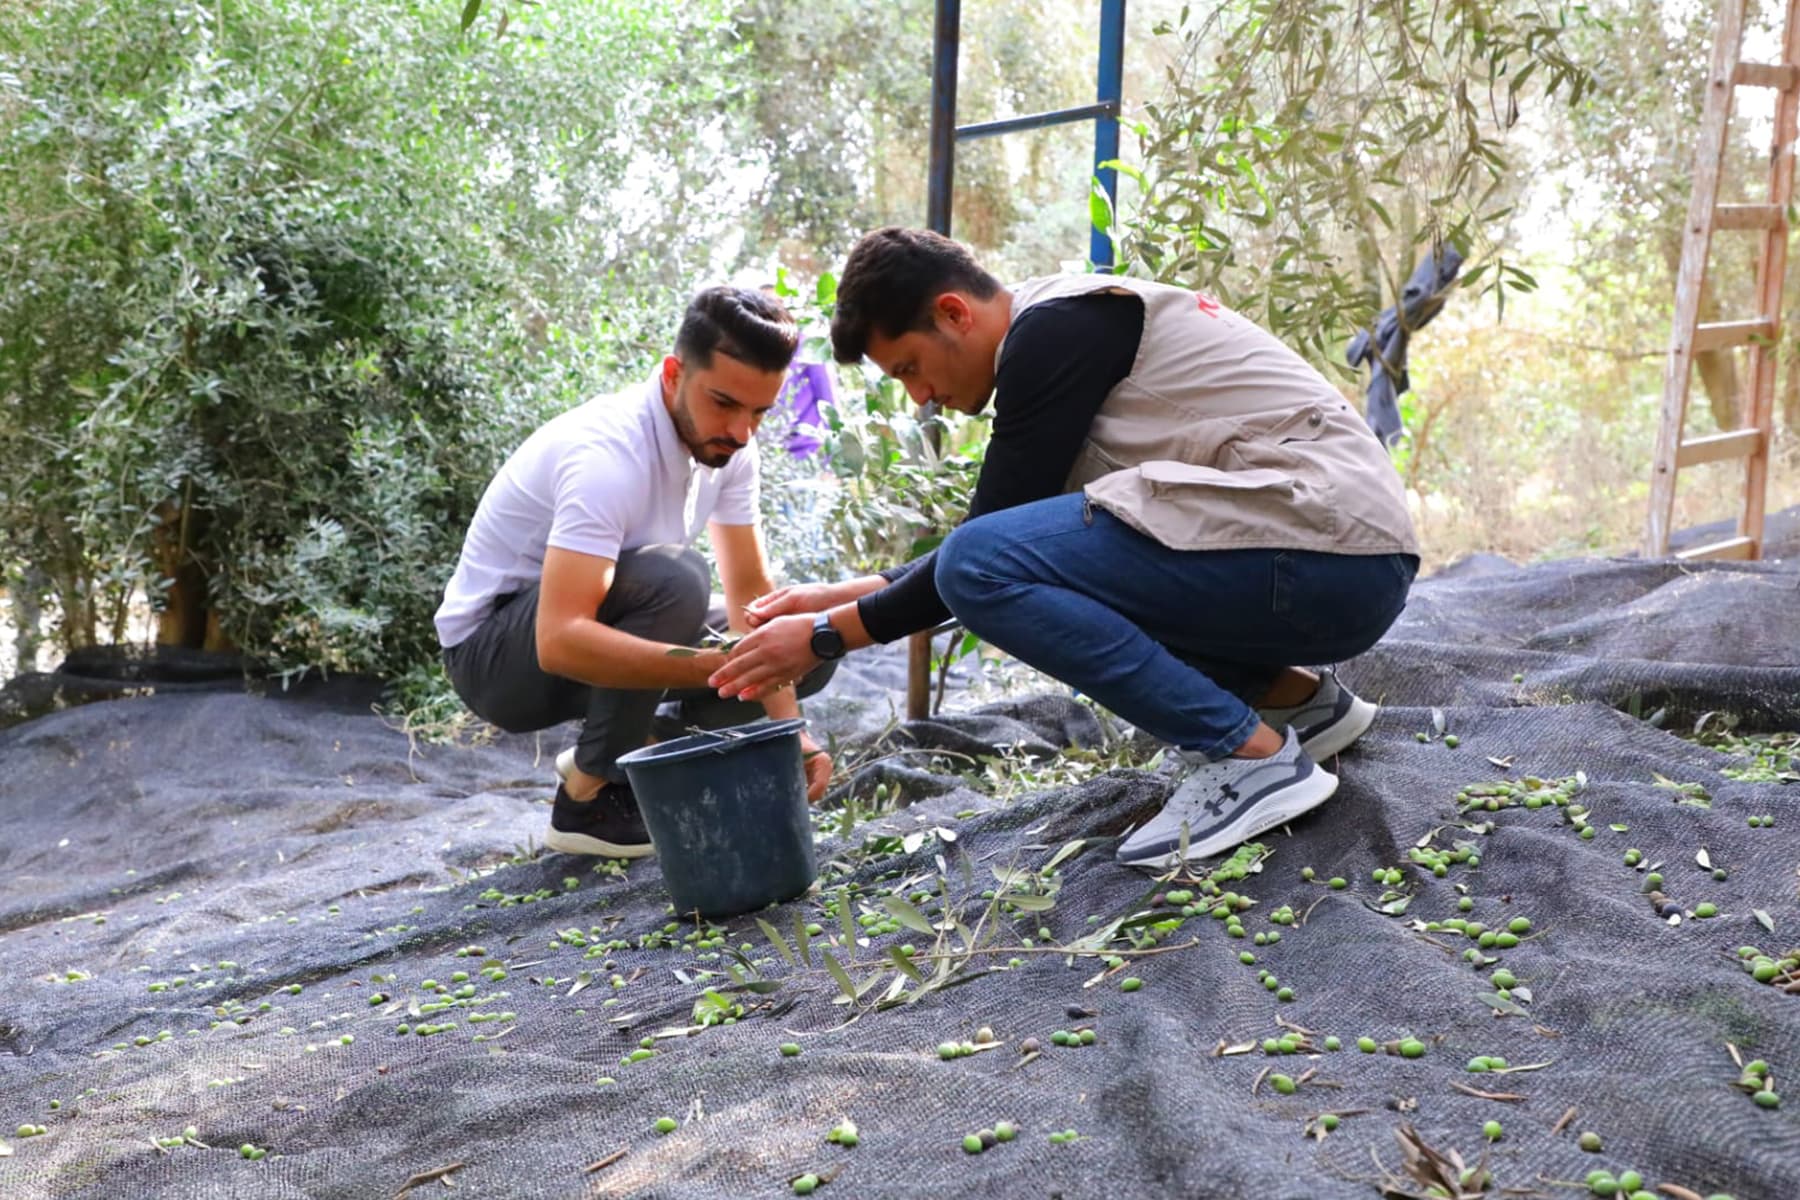 Two Palestinian youth gather olives from the floor of an orchid and place them into a black bucket.